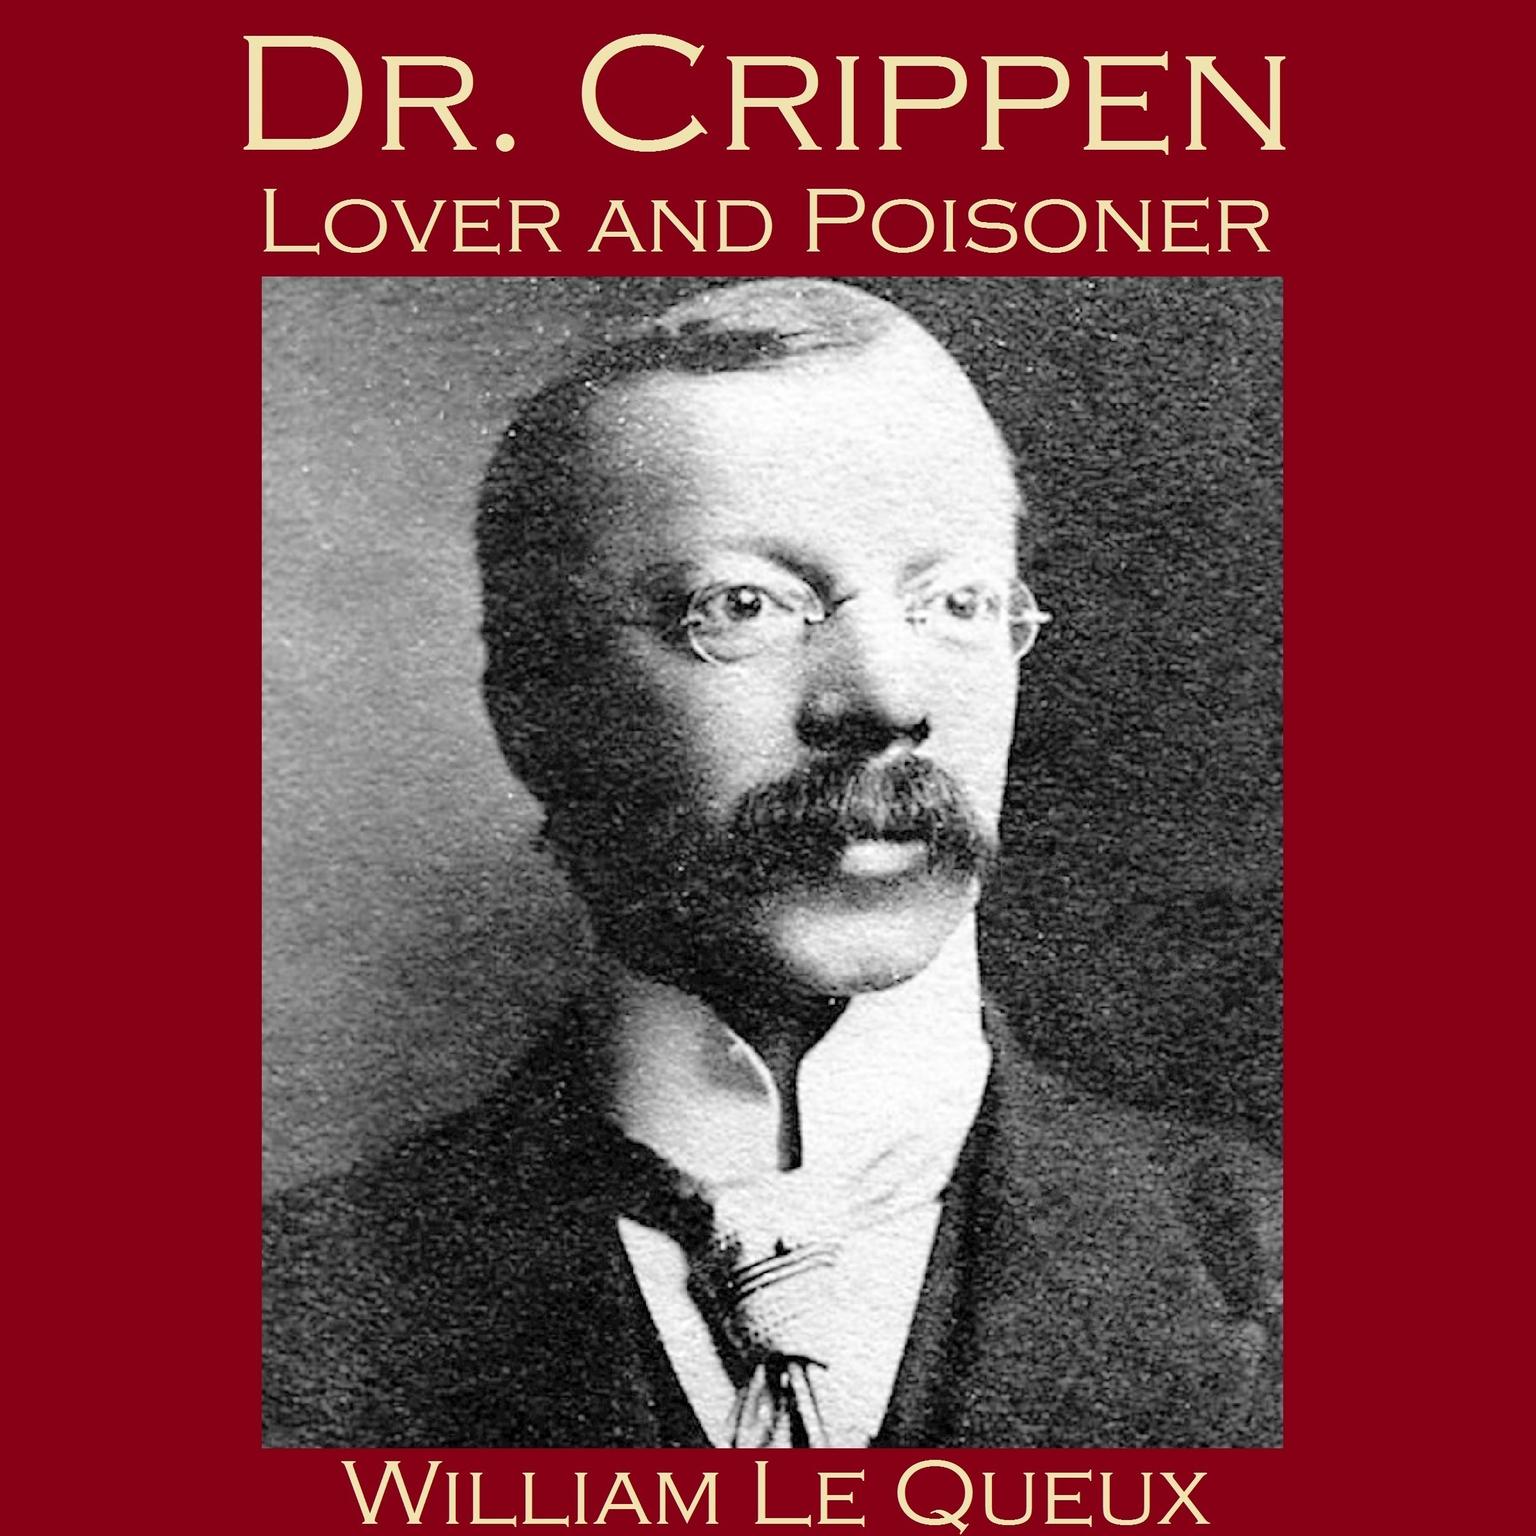 Dr. Crippen, Lover and Poisoner Audiobook, by William Le Queux